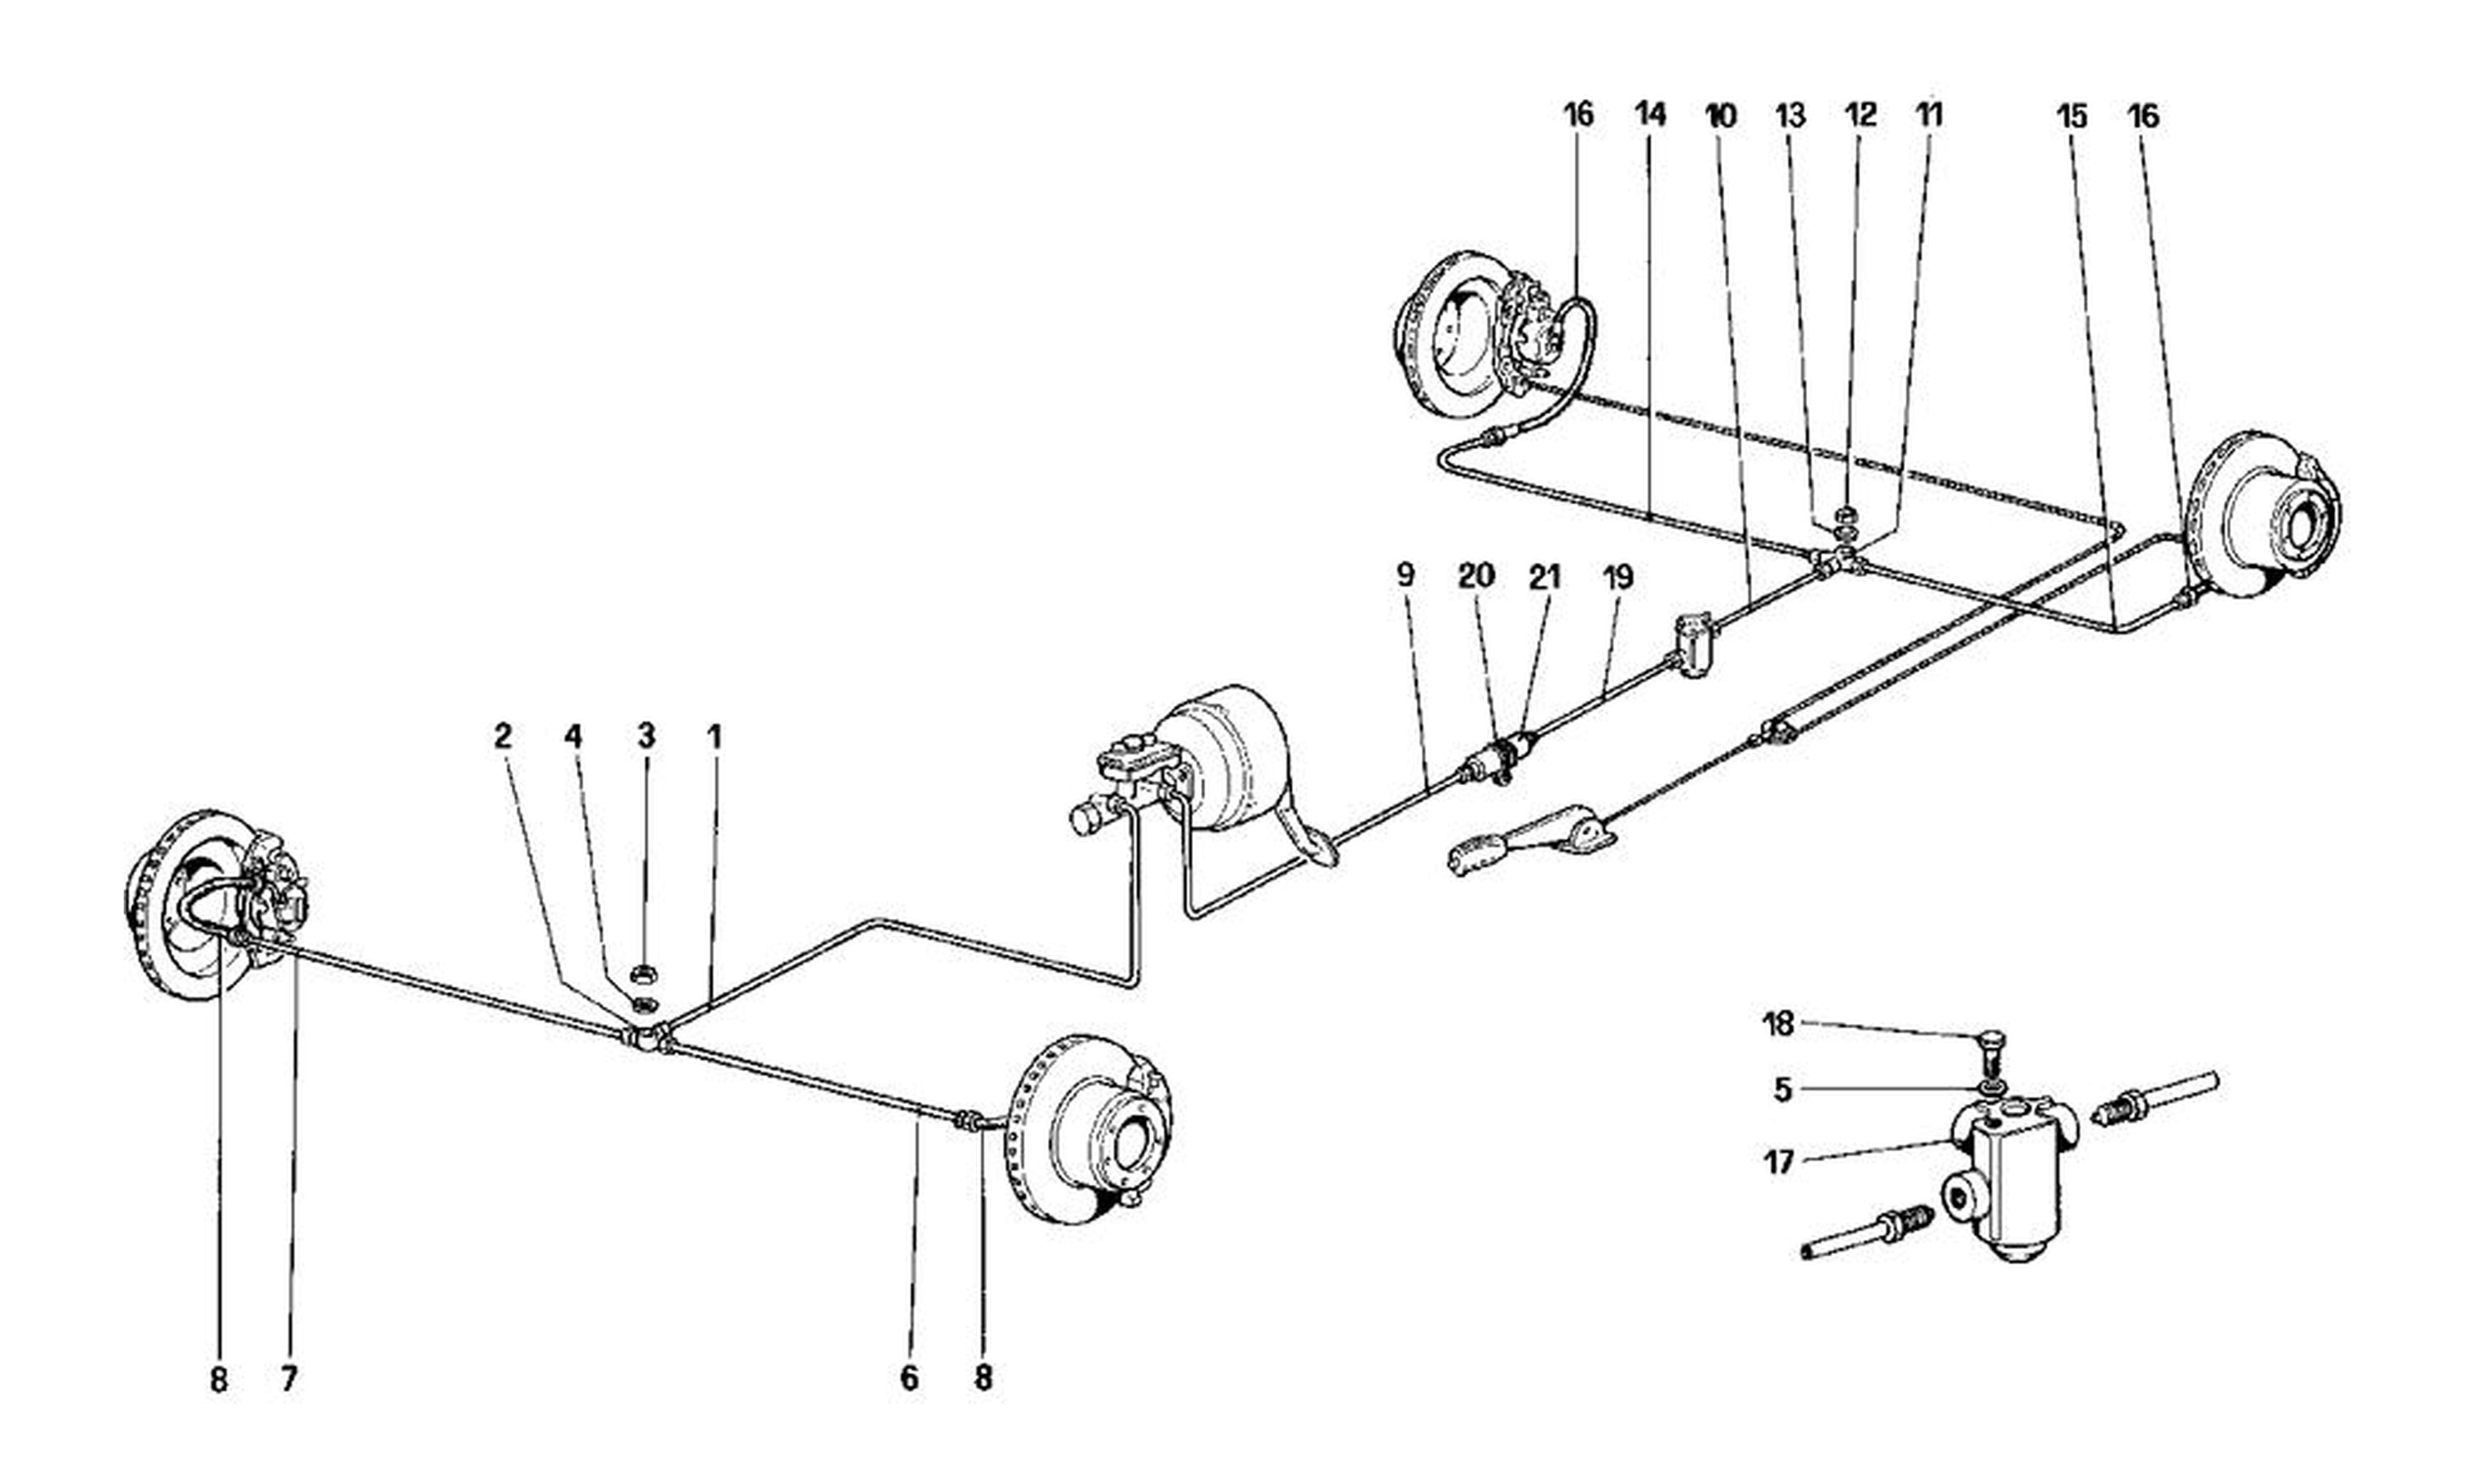 Schematic: Brake System (For Car Without Antiskid System)